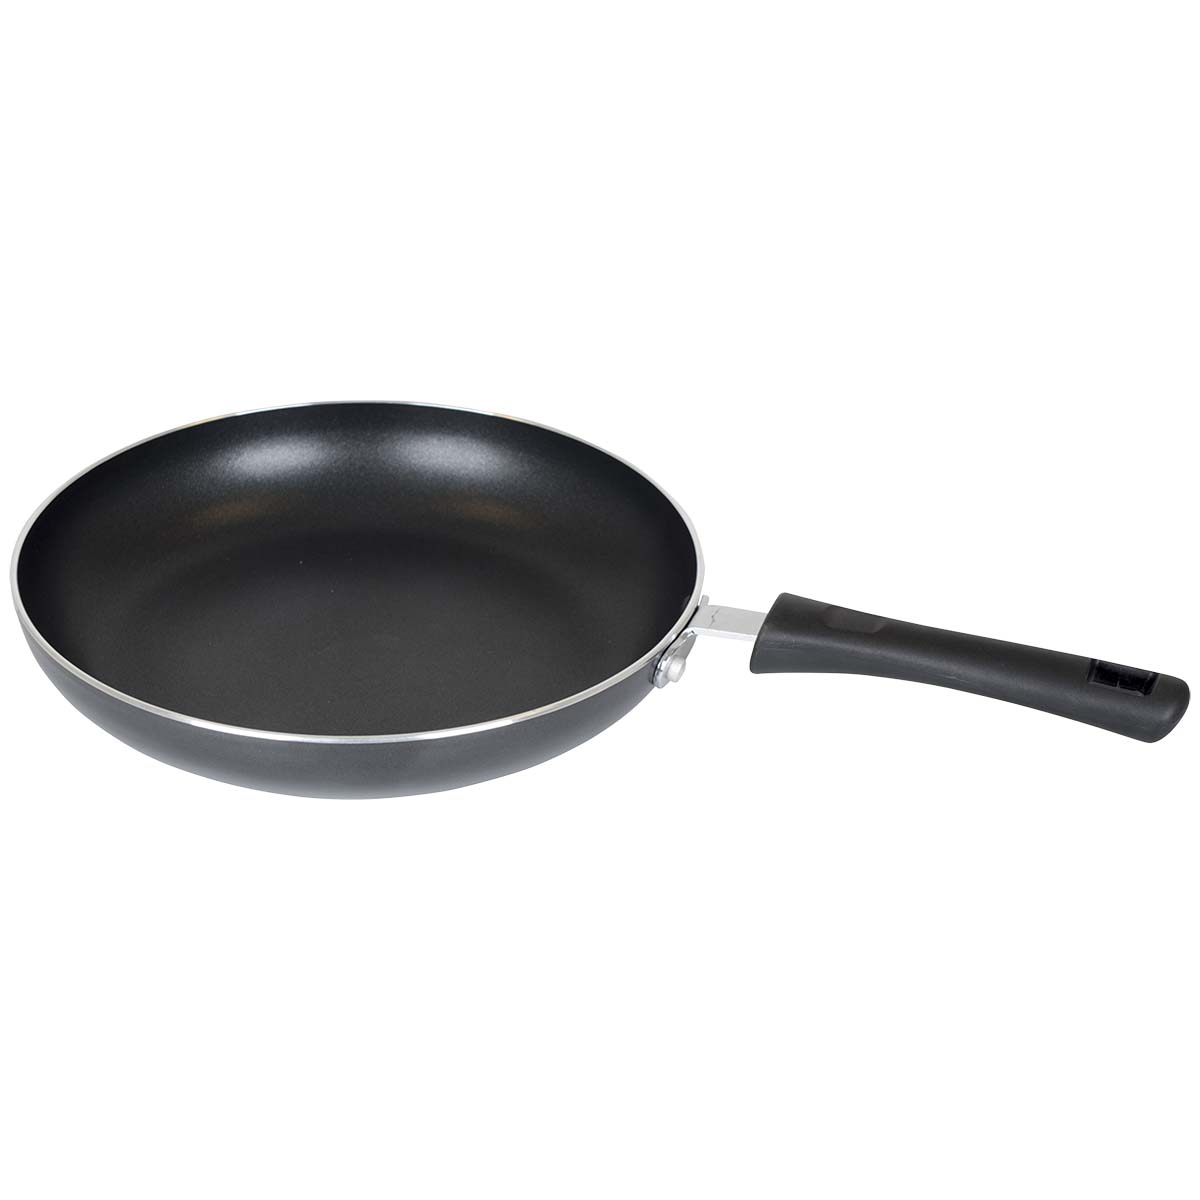 2304370 An aluminium frying pan. Provided with a non-stick coating. Suitable for the following heat sources; gas, ceramic and electric. Thickness: 3.5 millimetres.